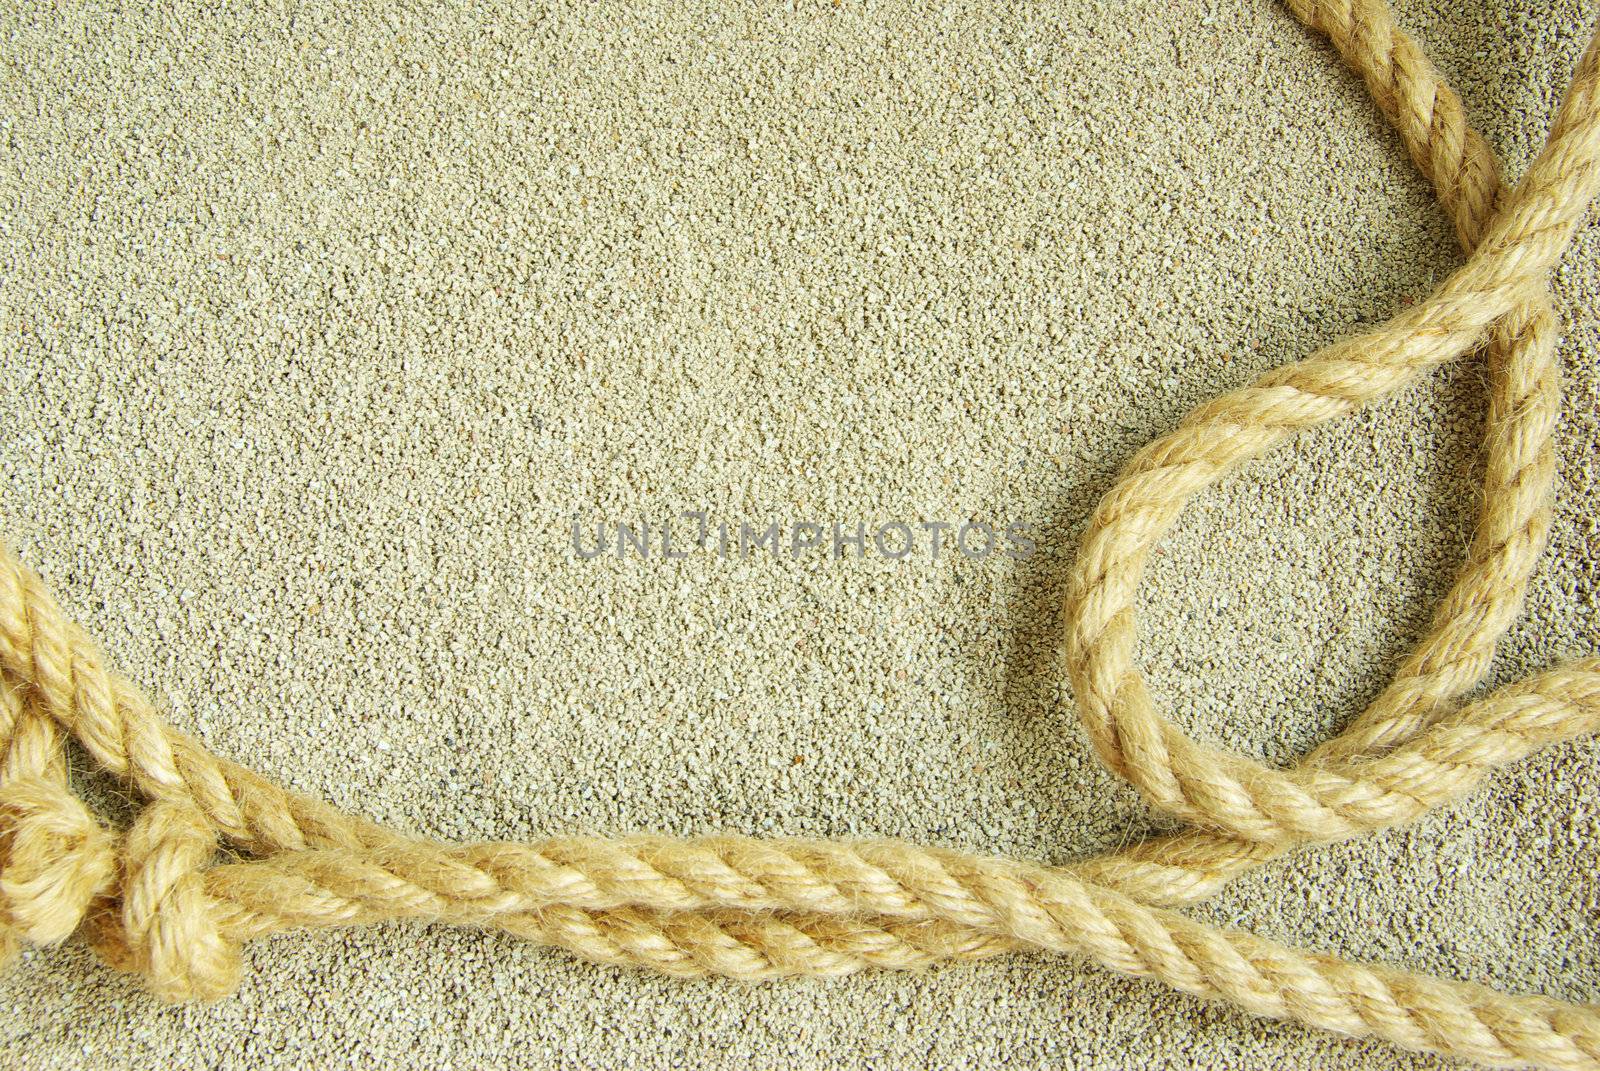  rope isolated on a sand